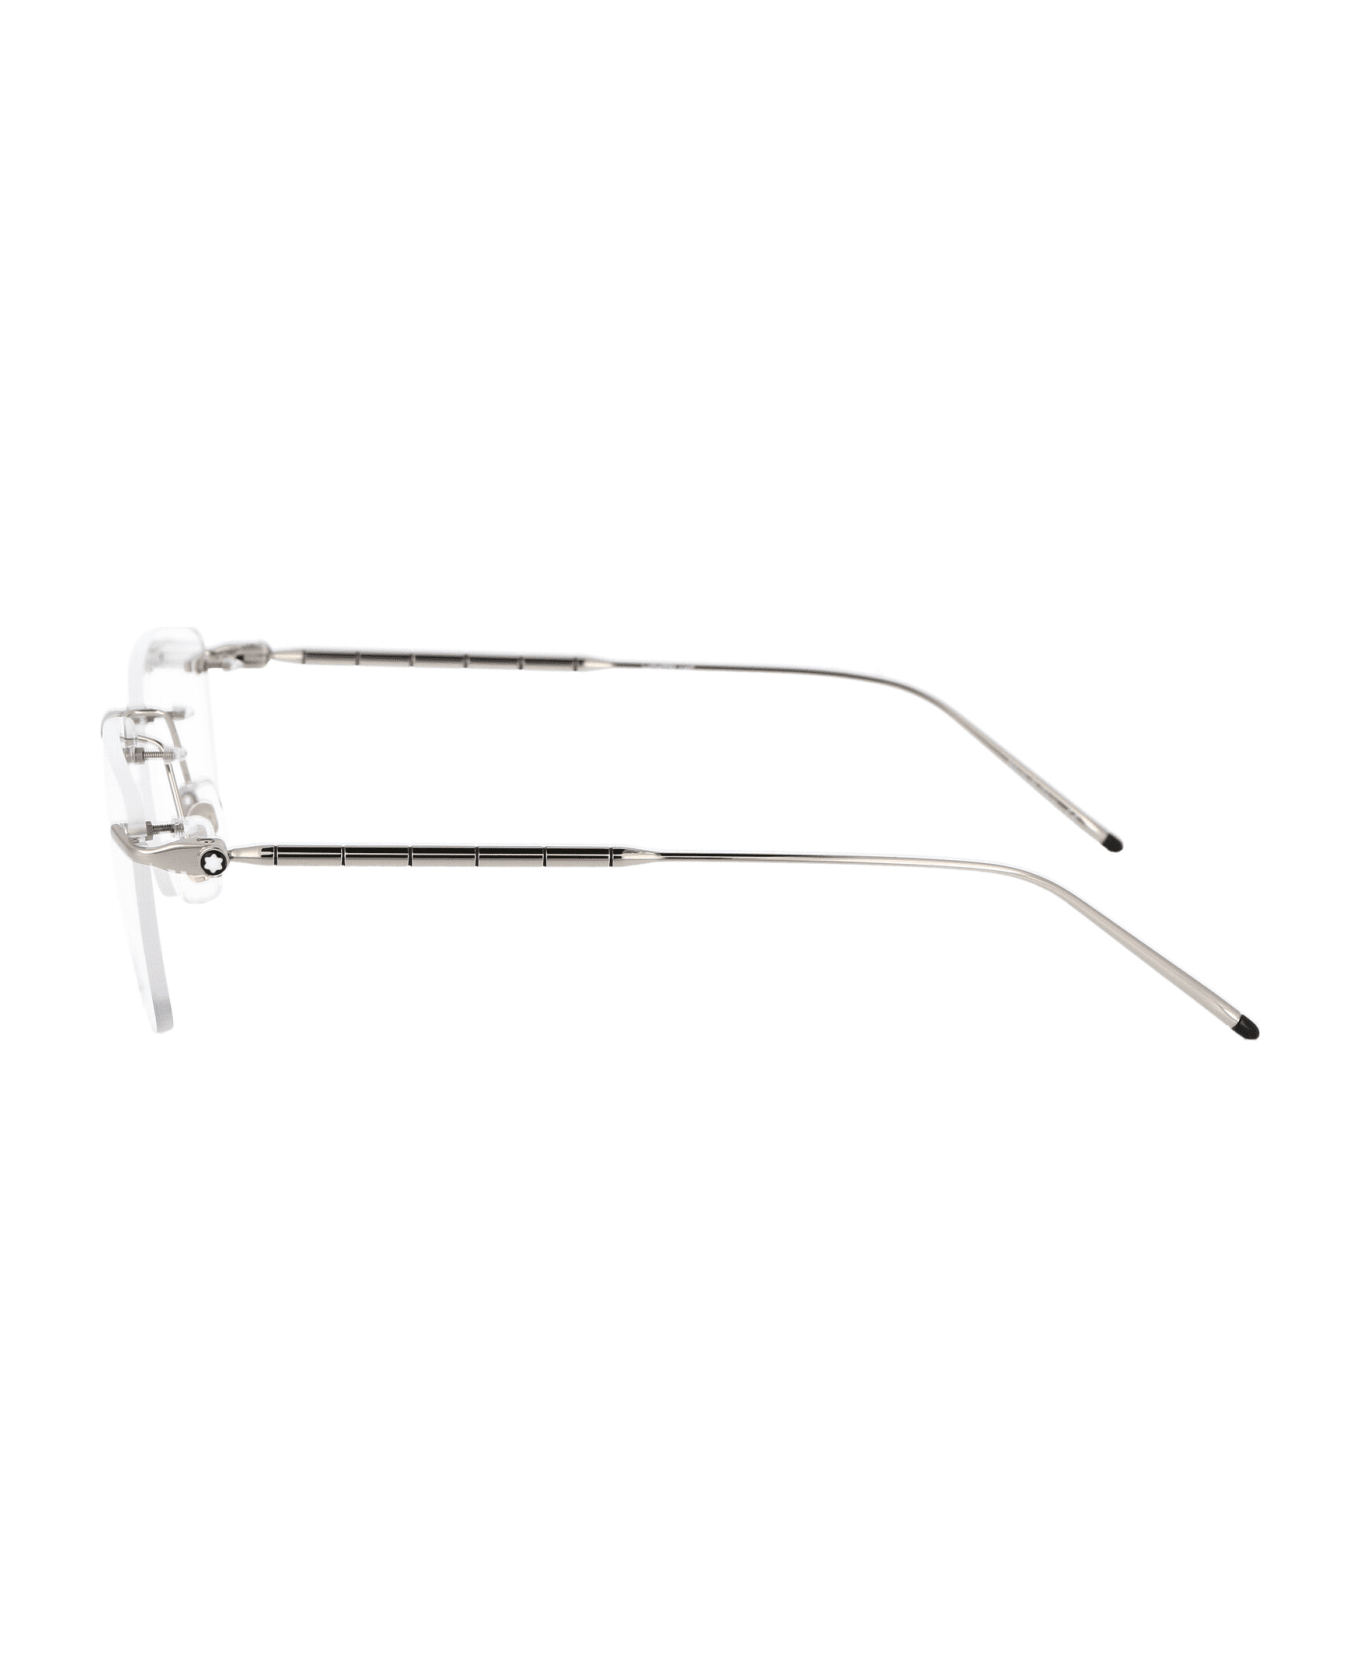 Montblanc Mb0215o Glasses - 002 SILVER SILVER TRANSPARENT